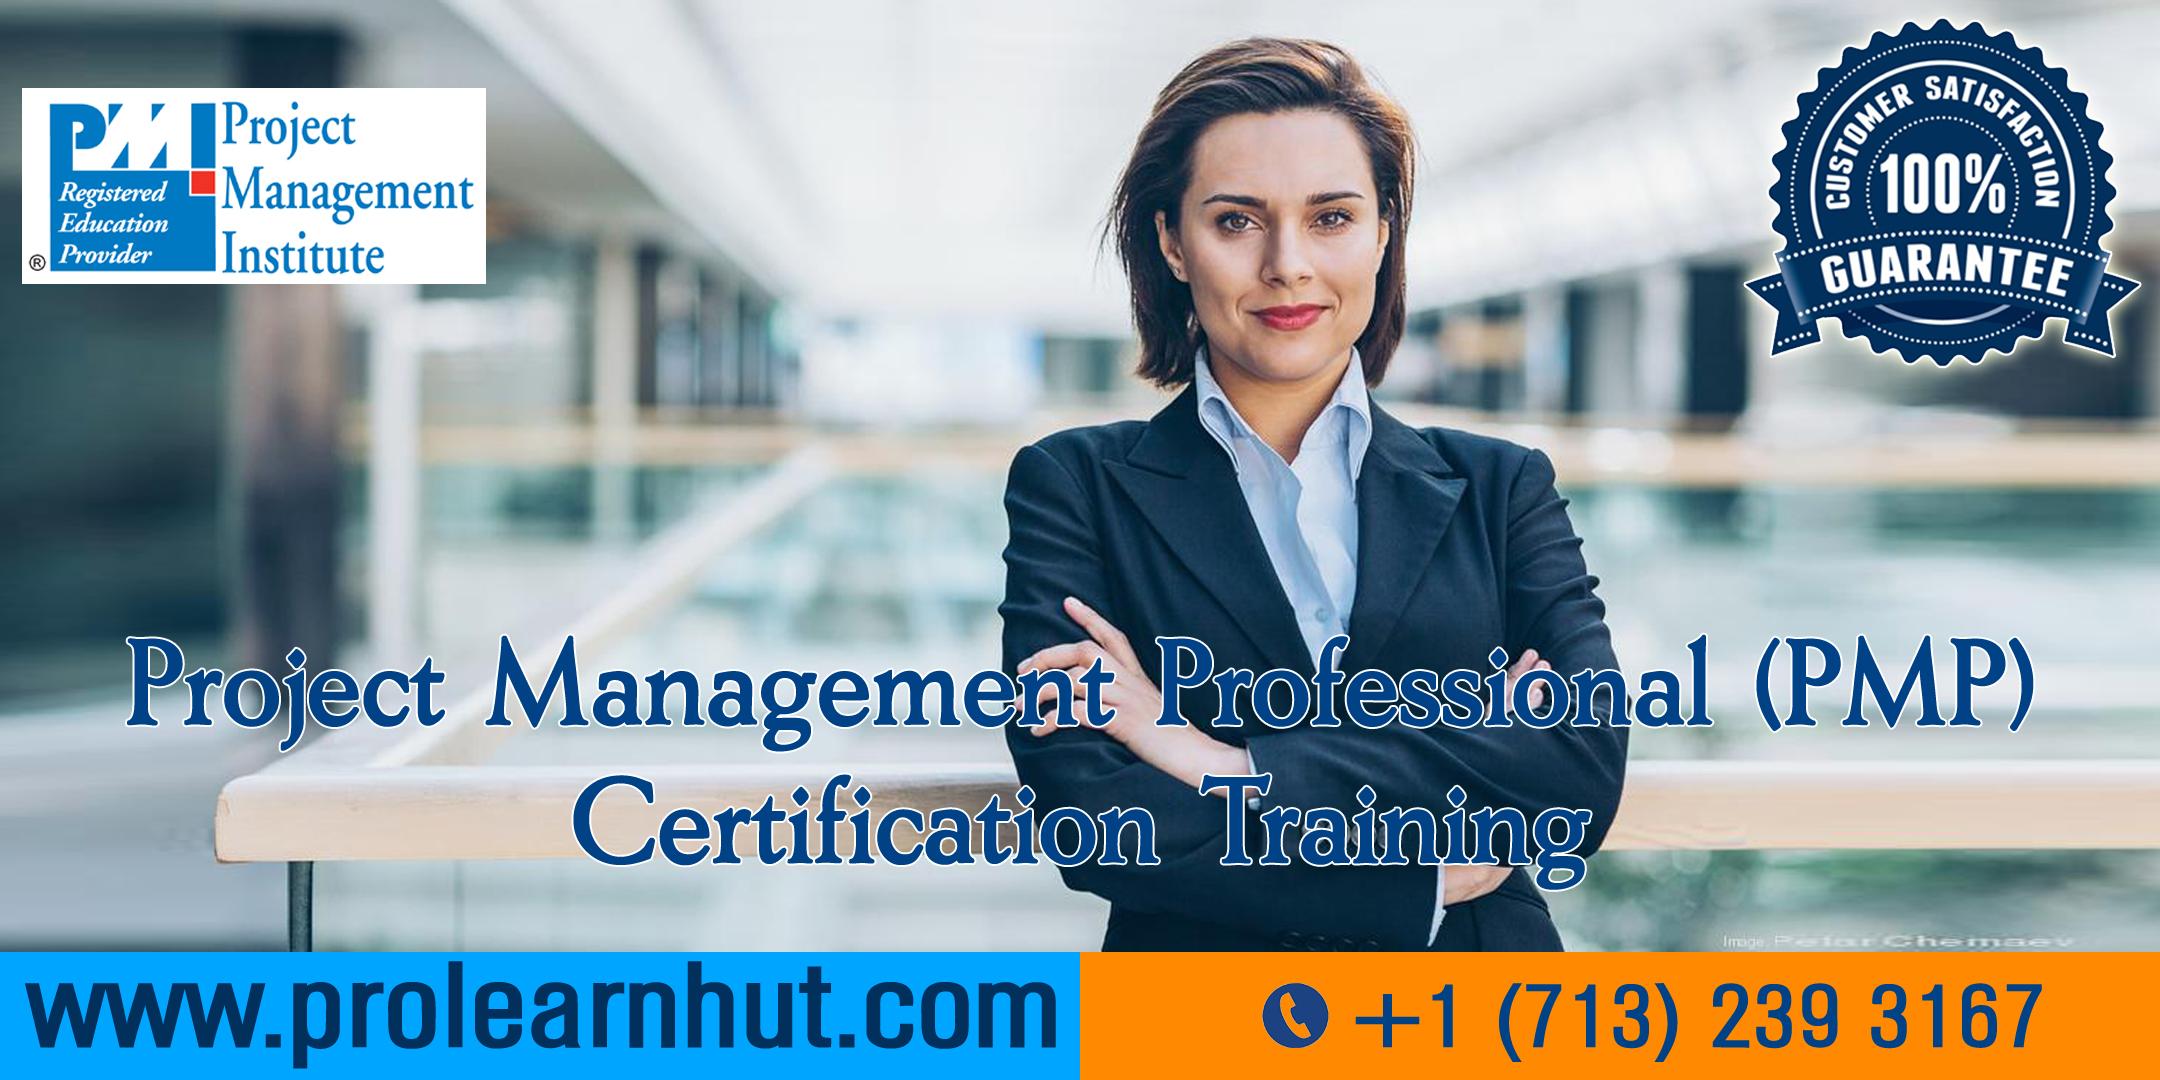 PMP Certification | Project Management Certification| PMP Training in Miami Gardens, FL | ProLearnHut